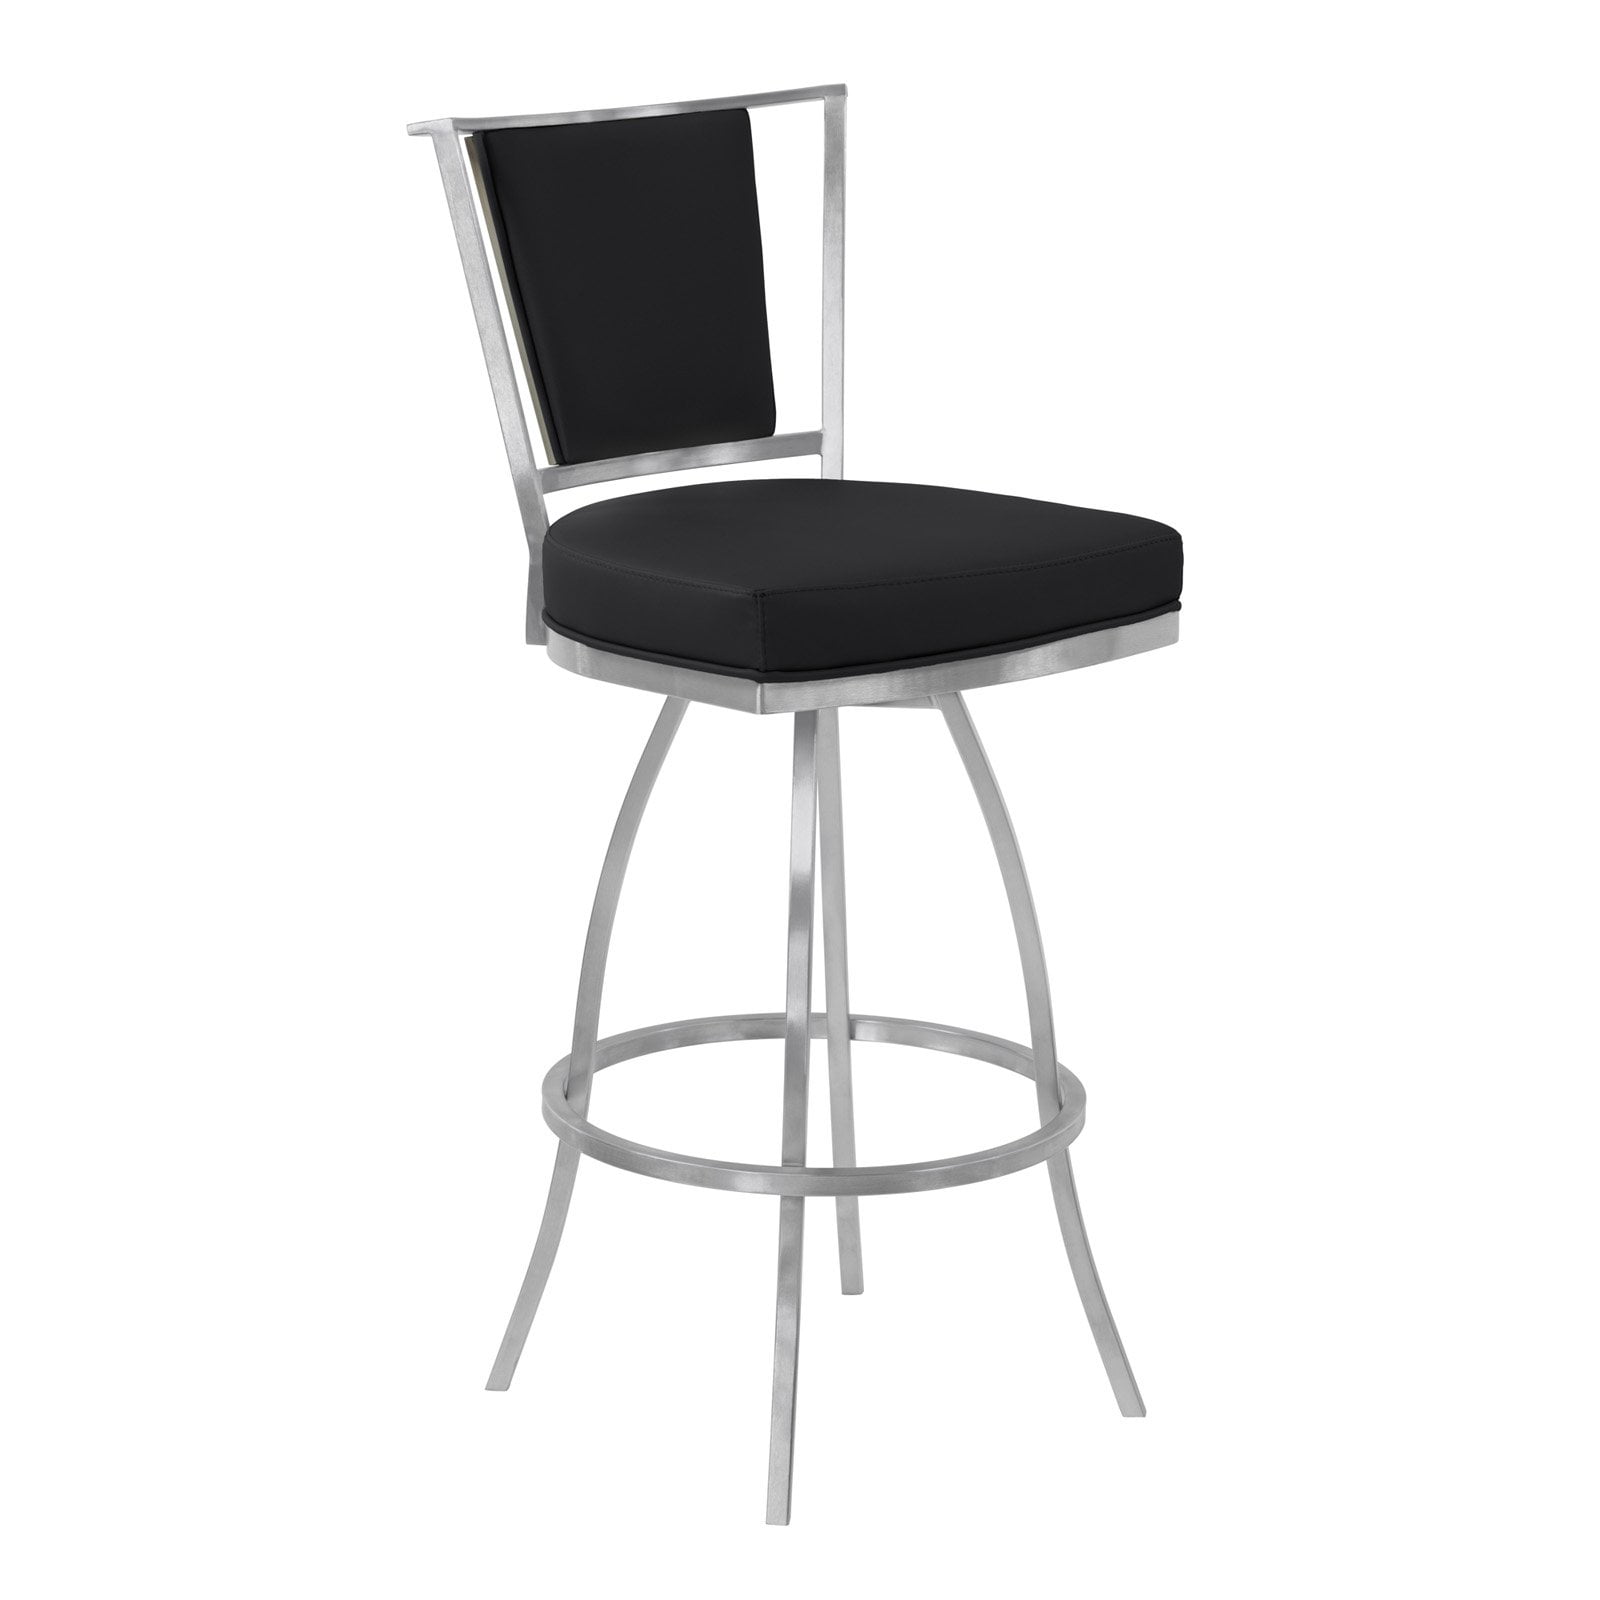 Armen Living Delhi Metal Swivel Barstool in Black Faux Leather with ...